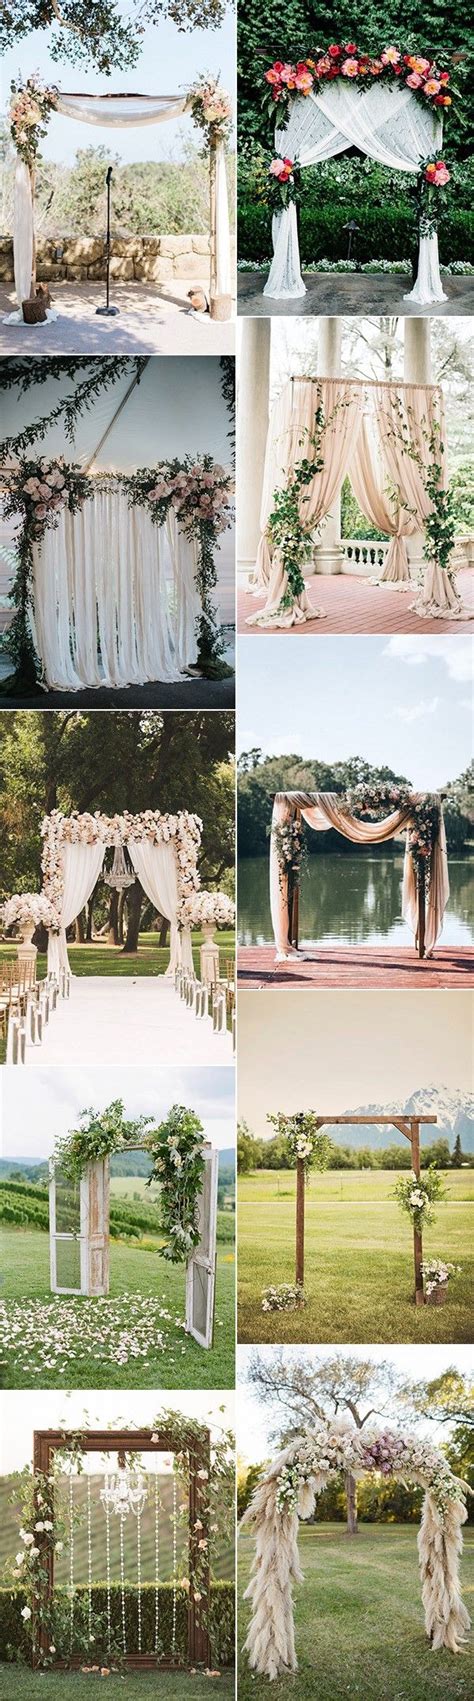 10 Stunning Wedding Arch Ideas For Your Ceremony Wedding Arbors Pink Wedding Colors Small